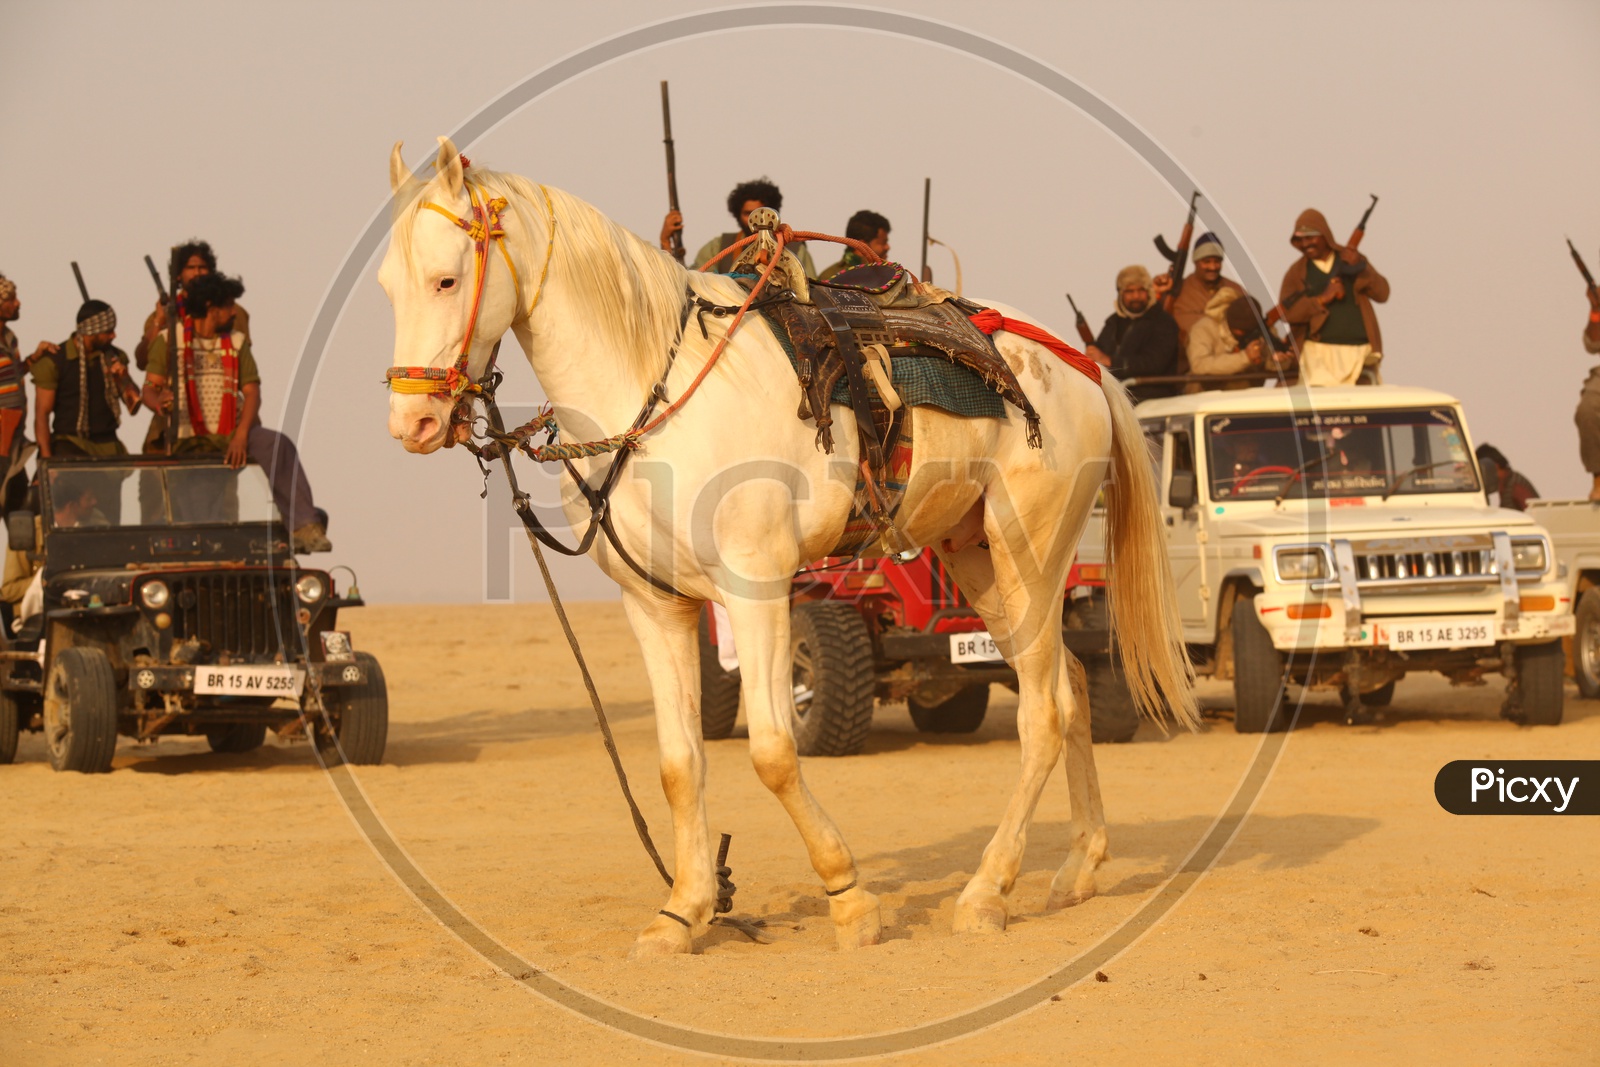 A horse and the people with guns on the vehicles in the desert